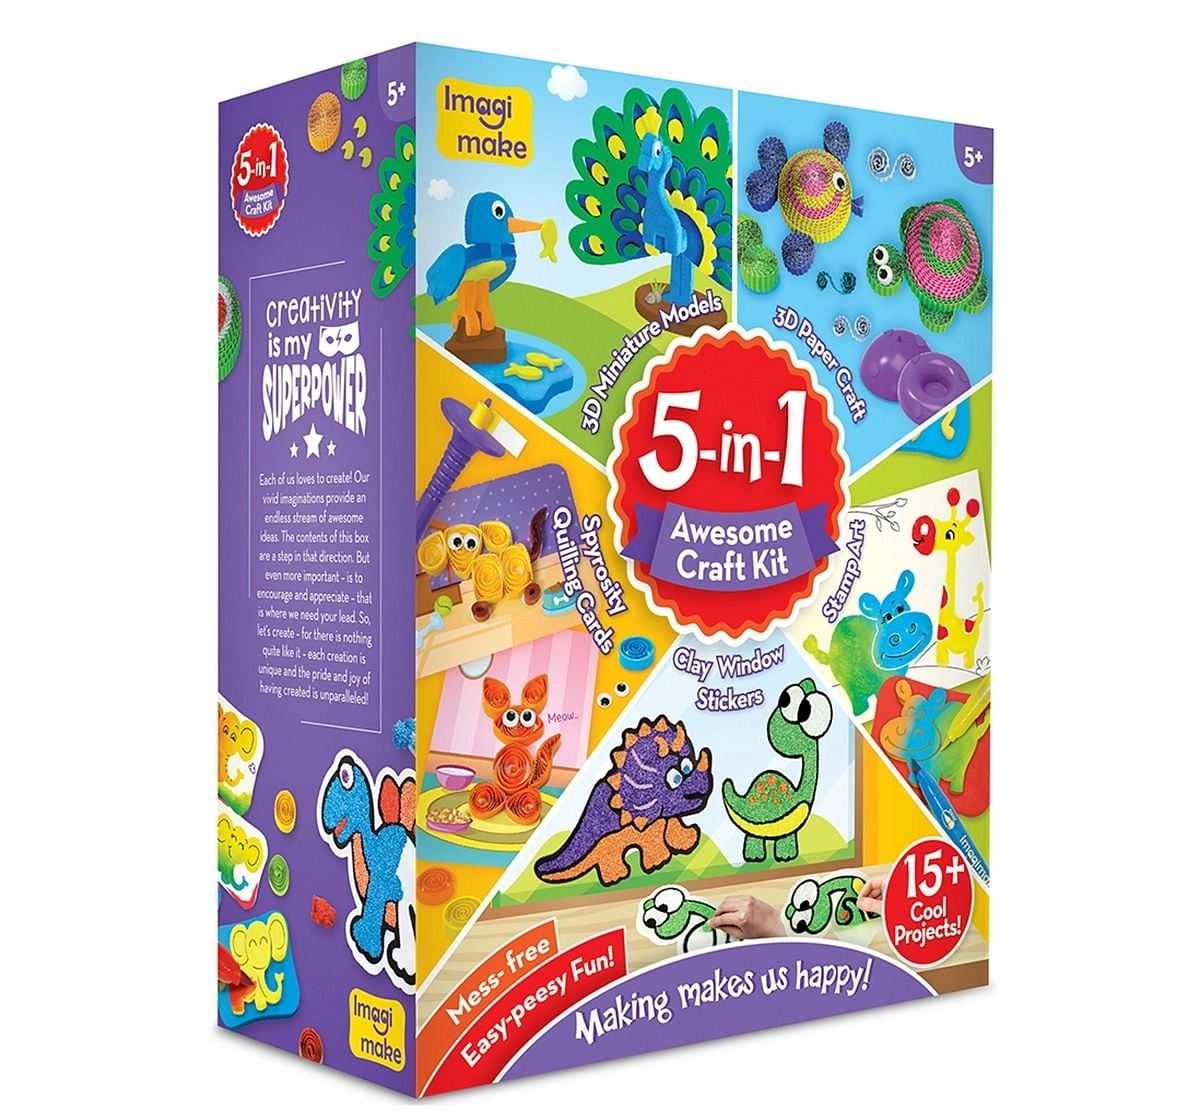 Imagimake 5-In-1 Awesome Craft Kit, 4Y+ (Multicolor)